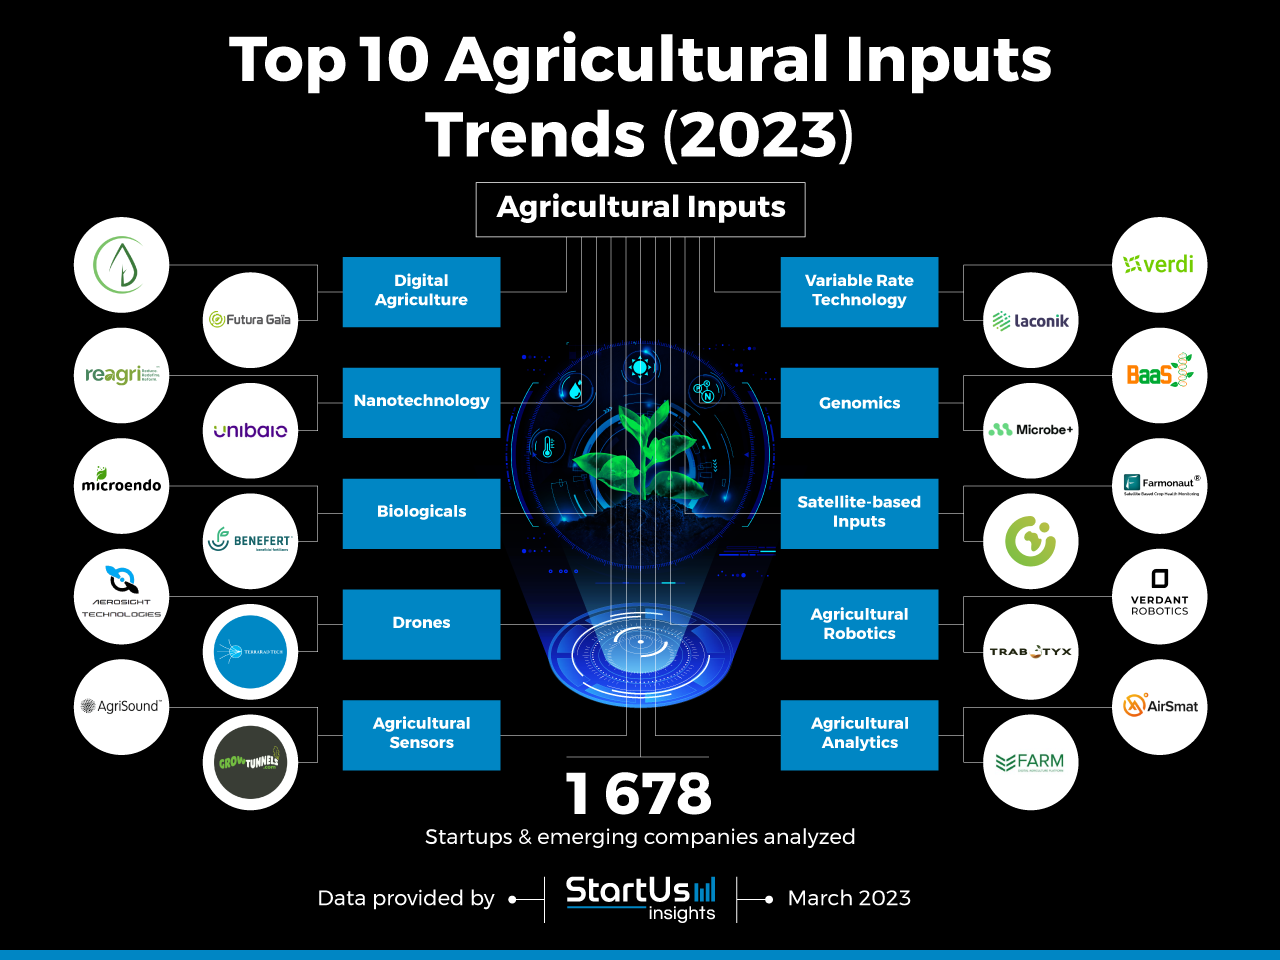 Top 10 Trends advancing Agricultural Inputs (2023) | StartUs Insights